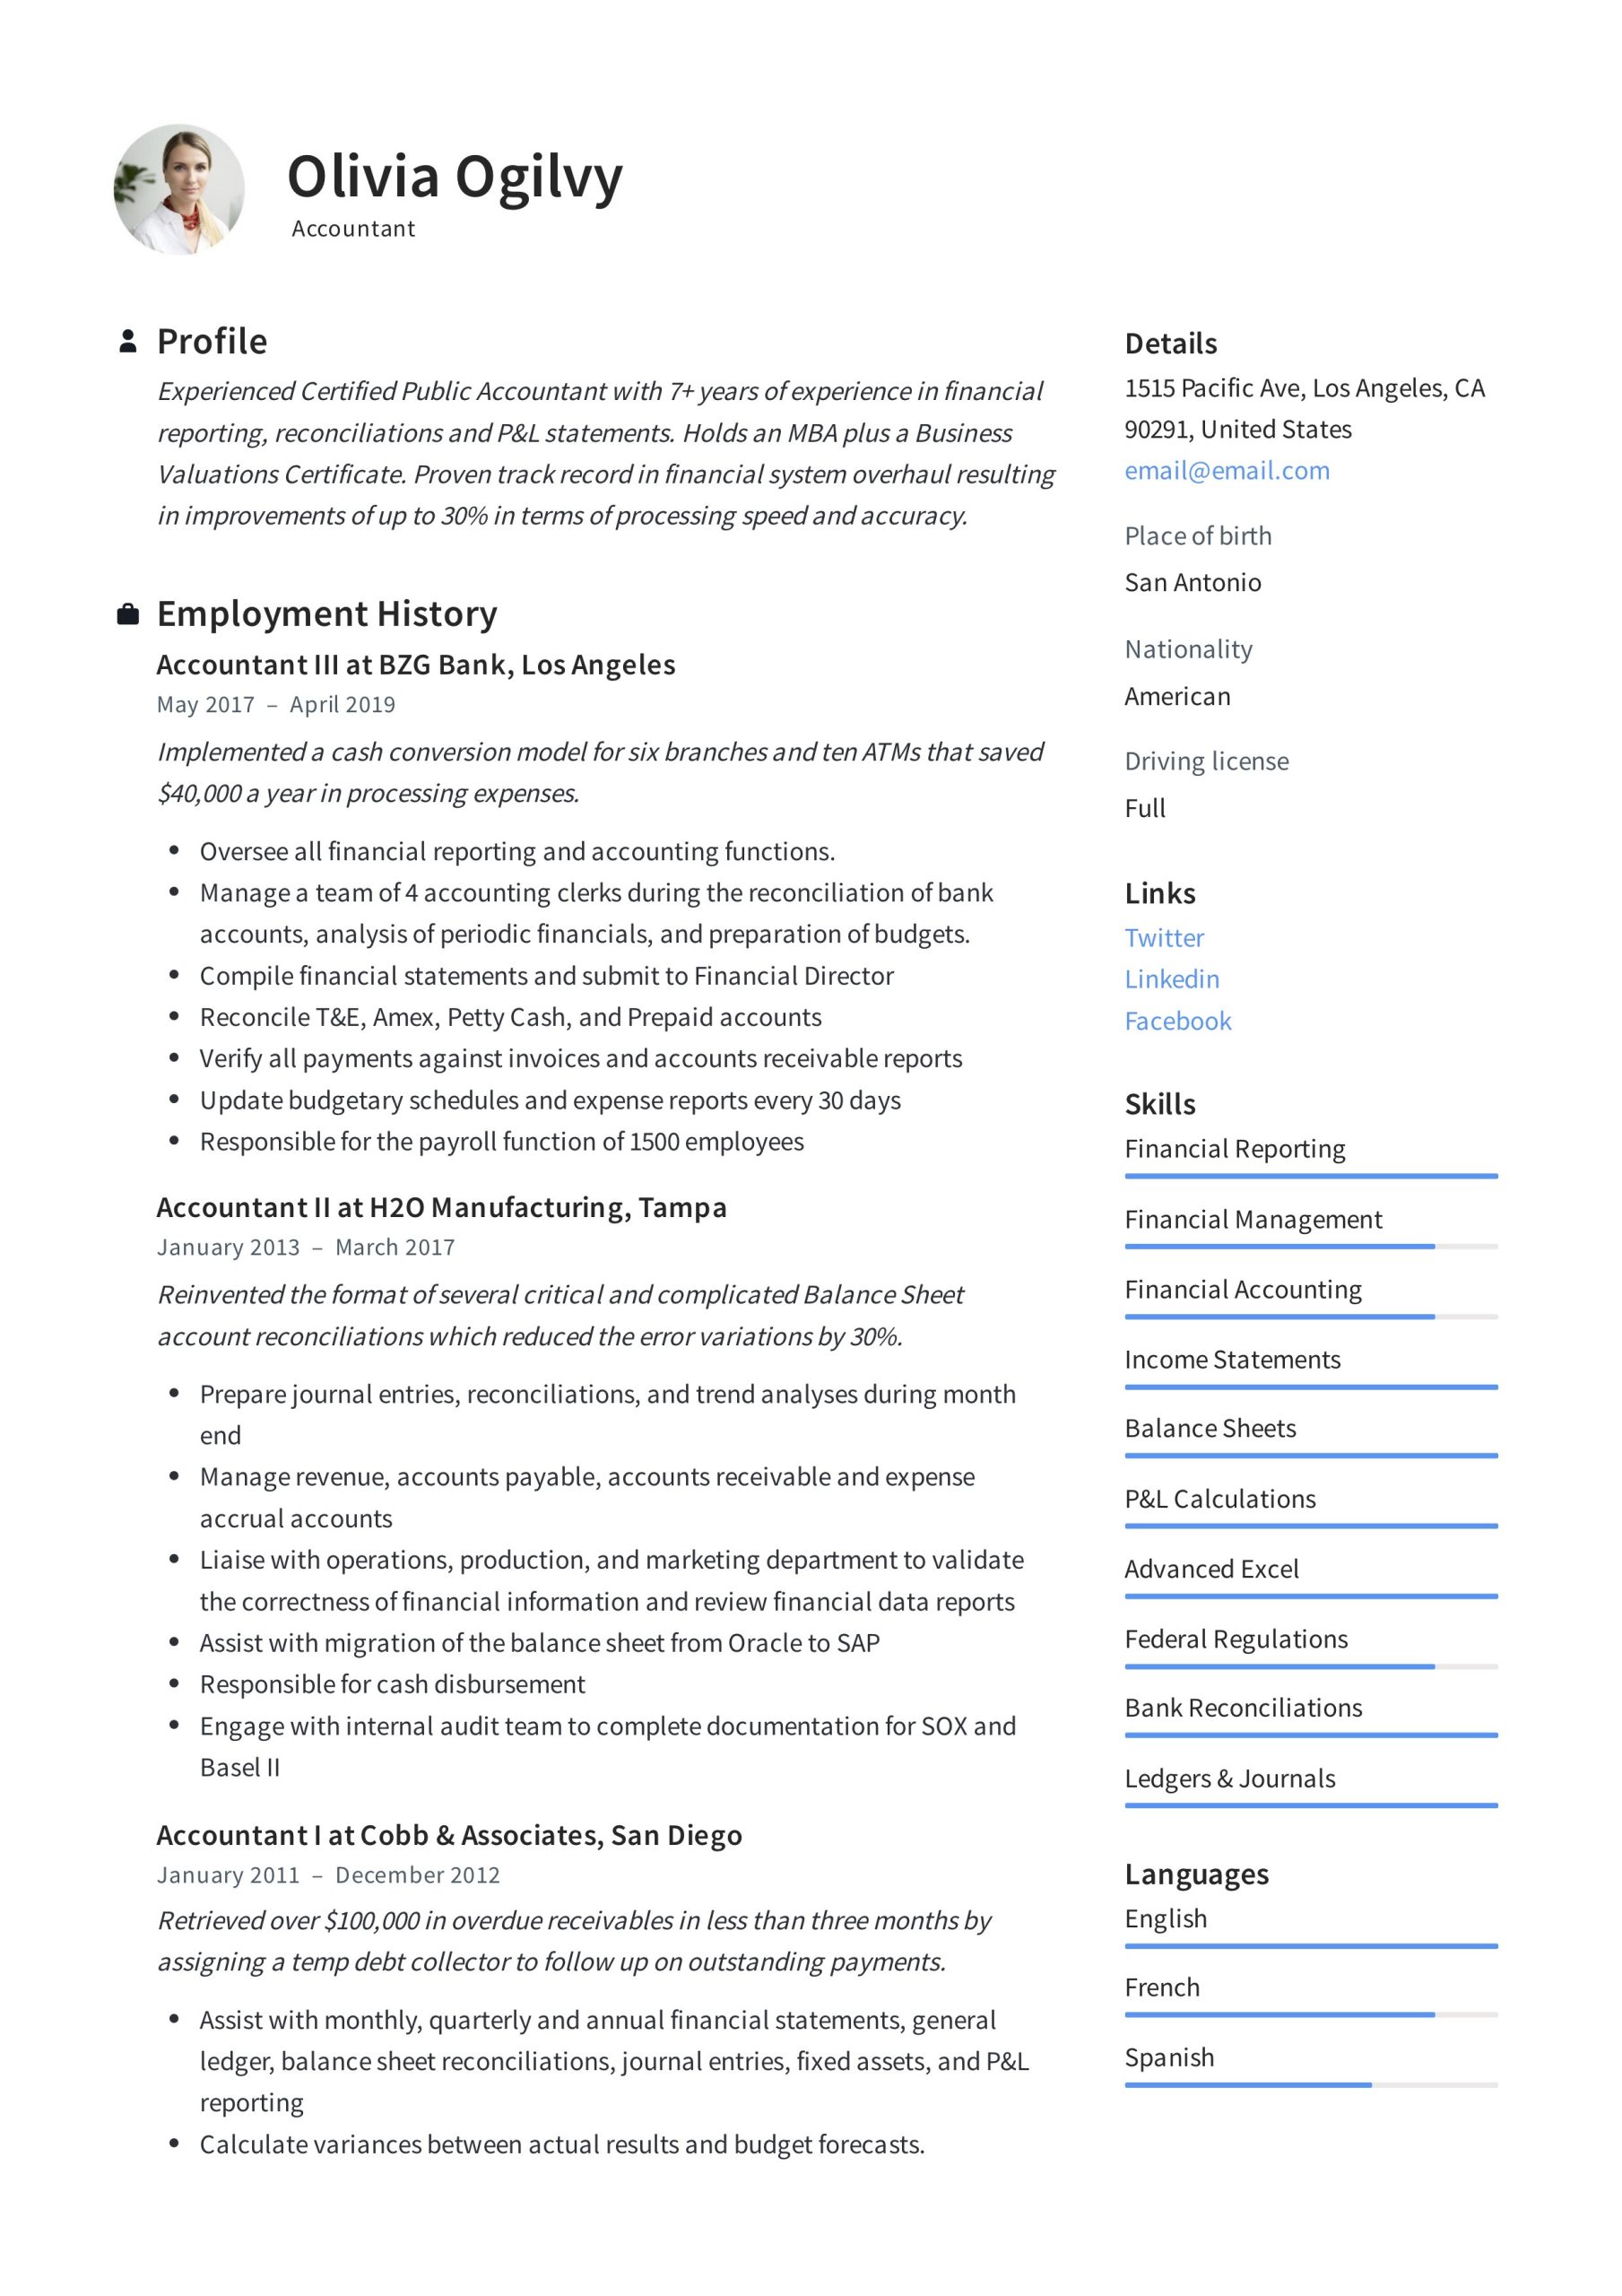 Resume Sample for Accountant Bank Reconciliation Accountant Resume & Writing Guide 19 Templates 2022